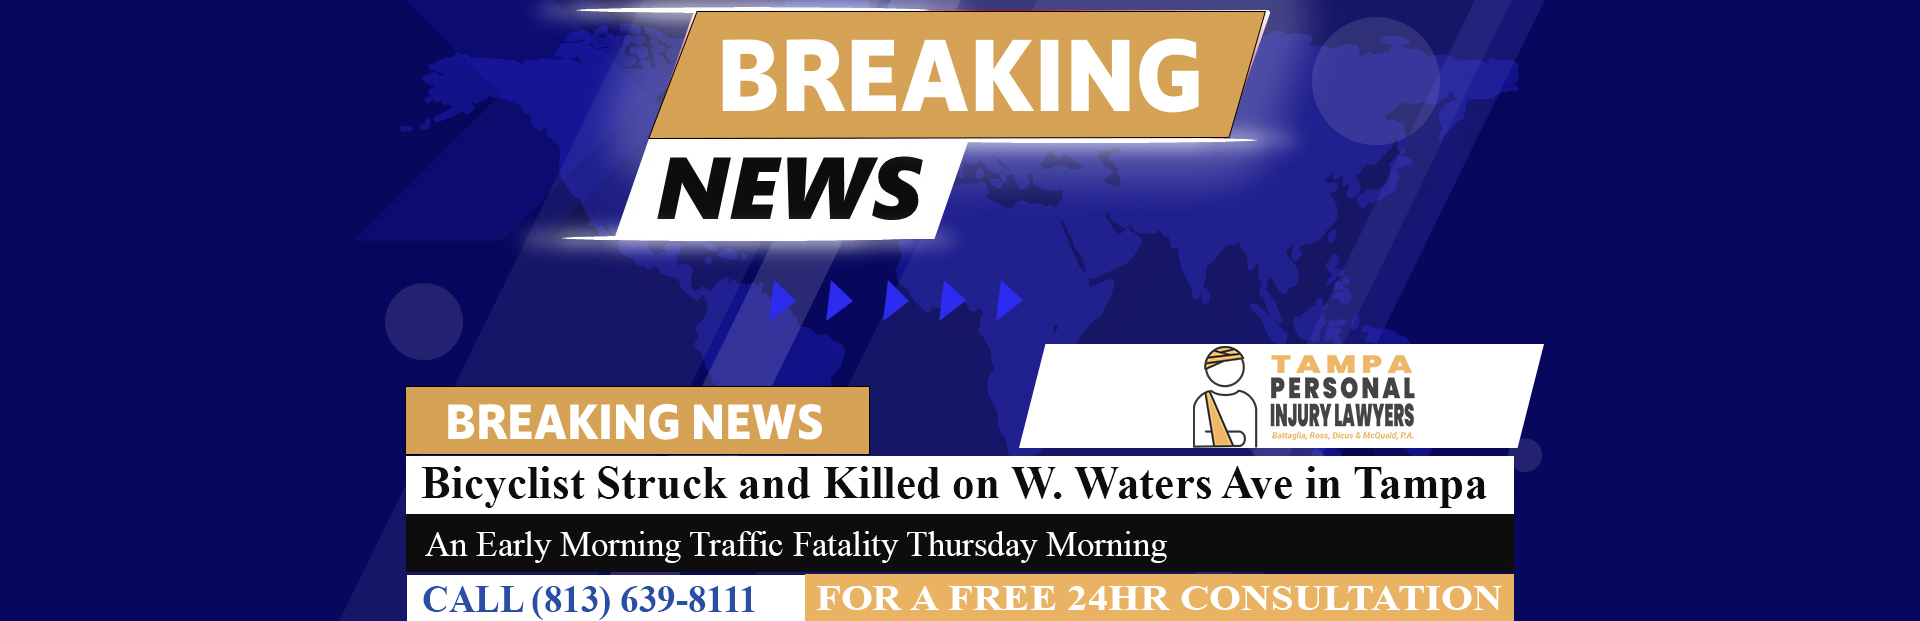 [09-02-23] Bicyclist Struck and Killed on W. Waters Ave in Tampa